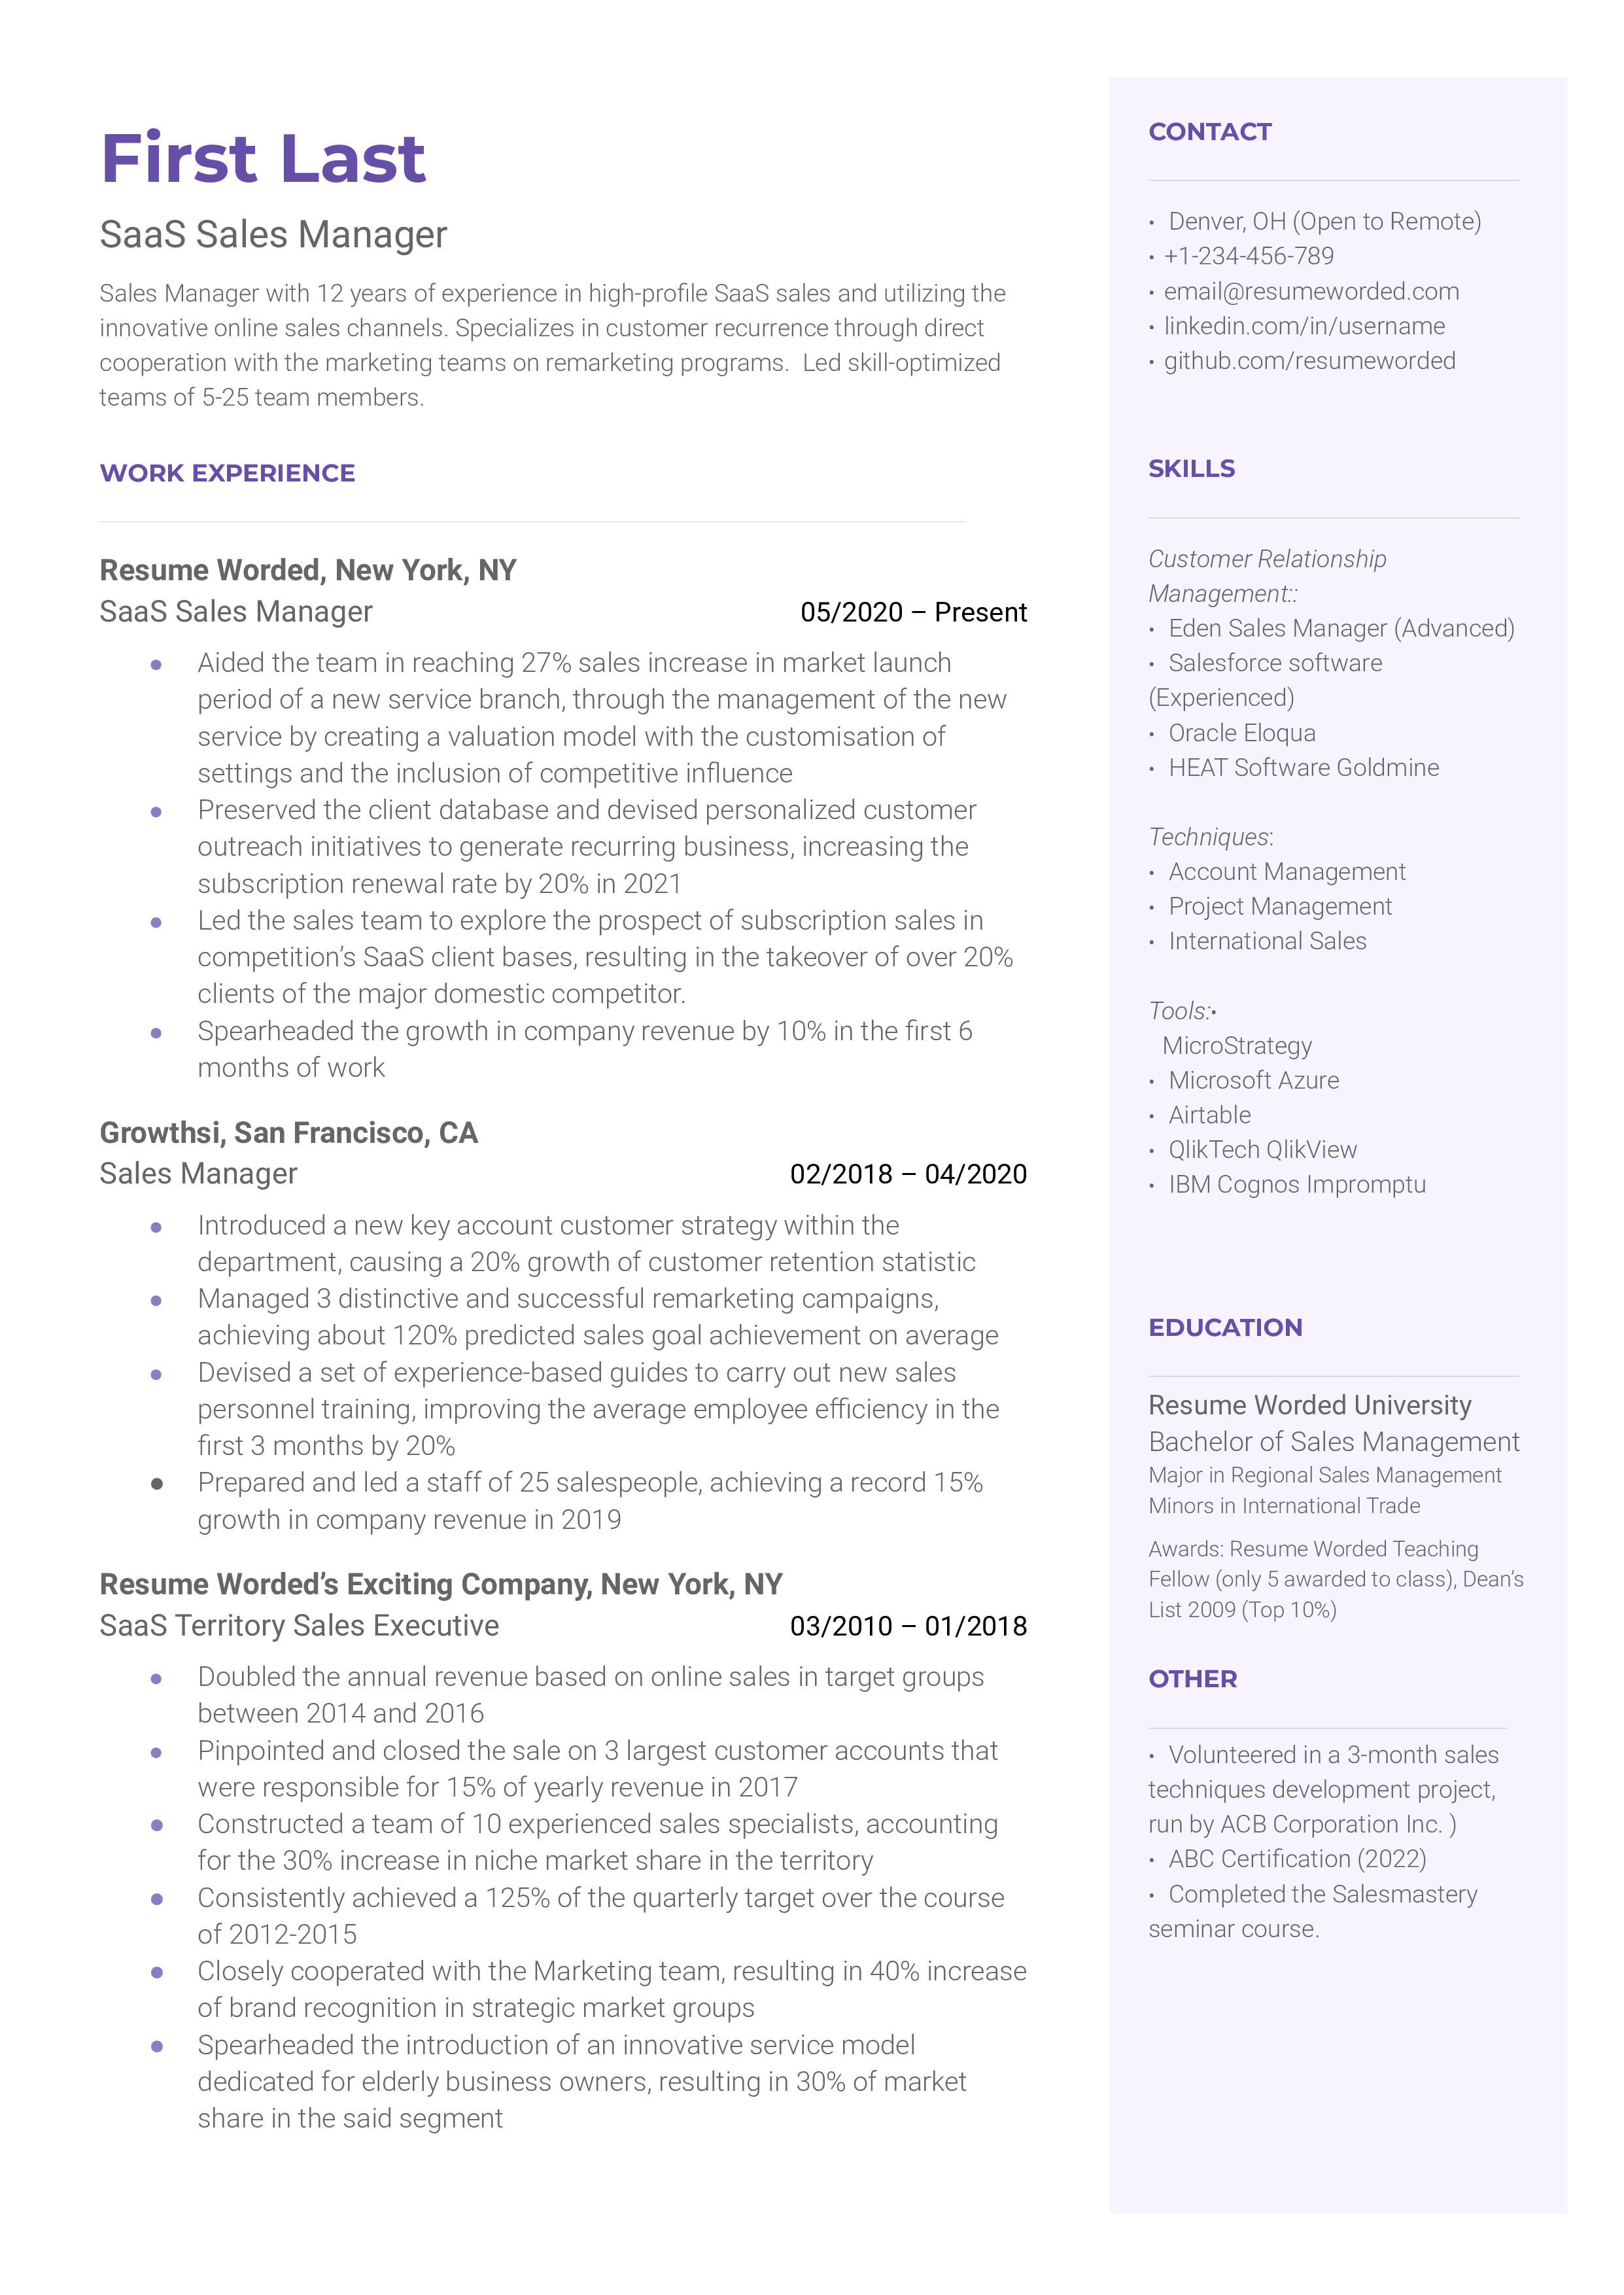 A SaaS sales manager resume template that demonstrates relevant industry experience